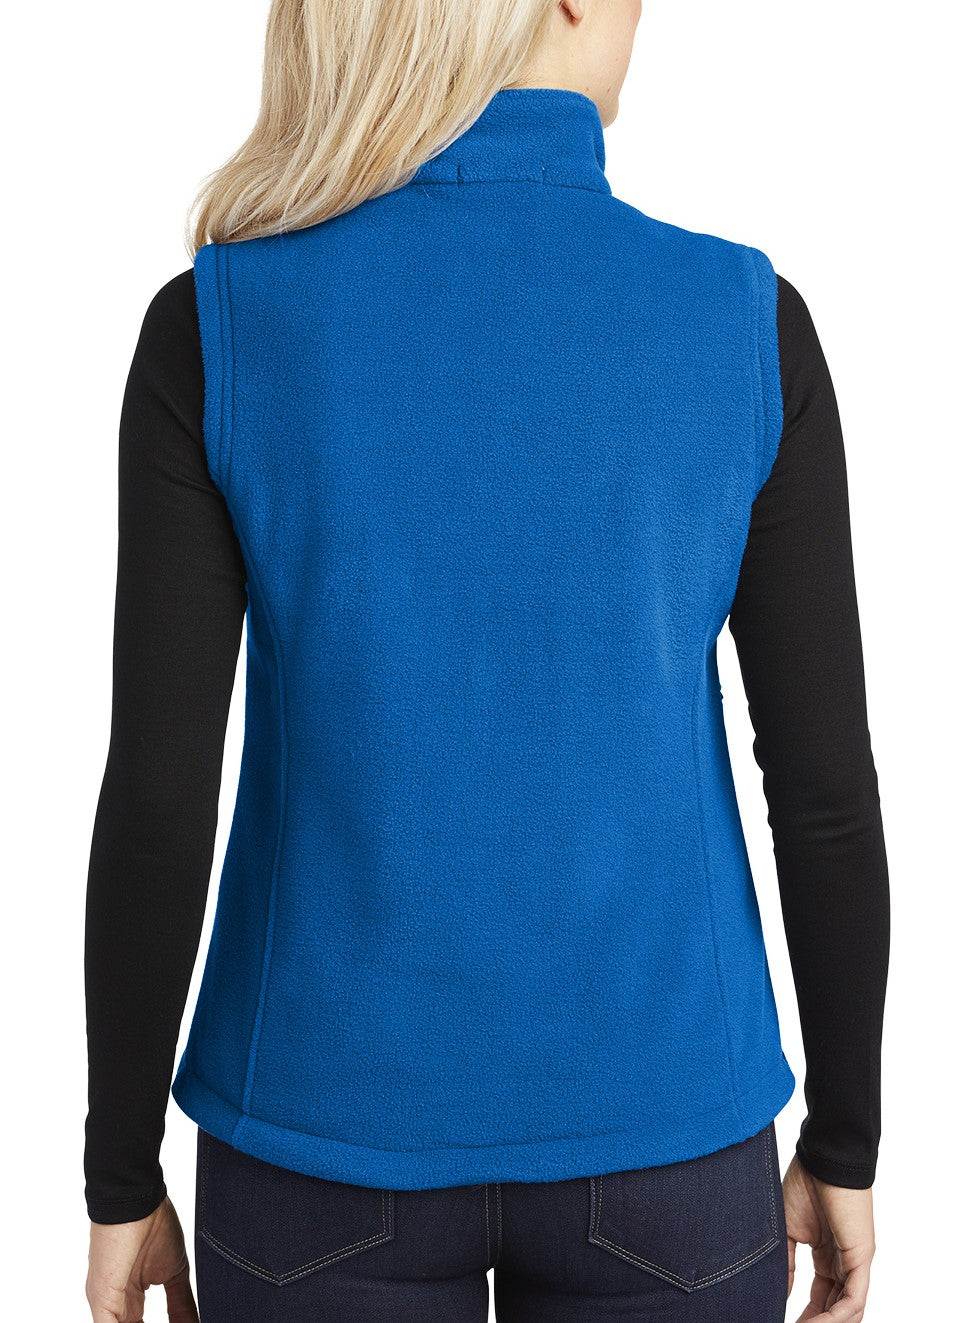 canyon fleece vest with zipper for ladies in royal blue color